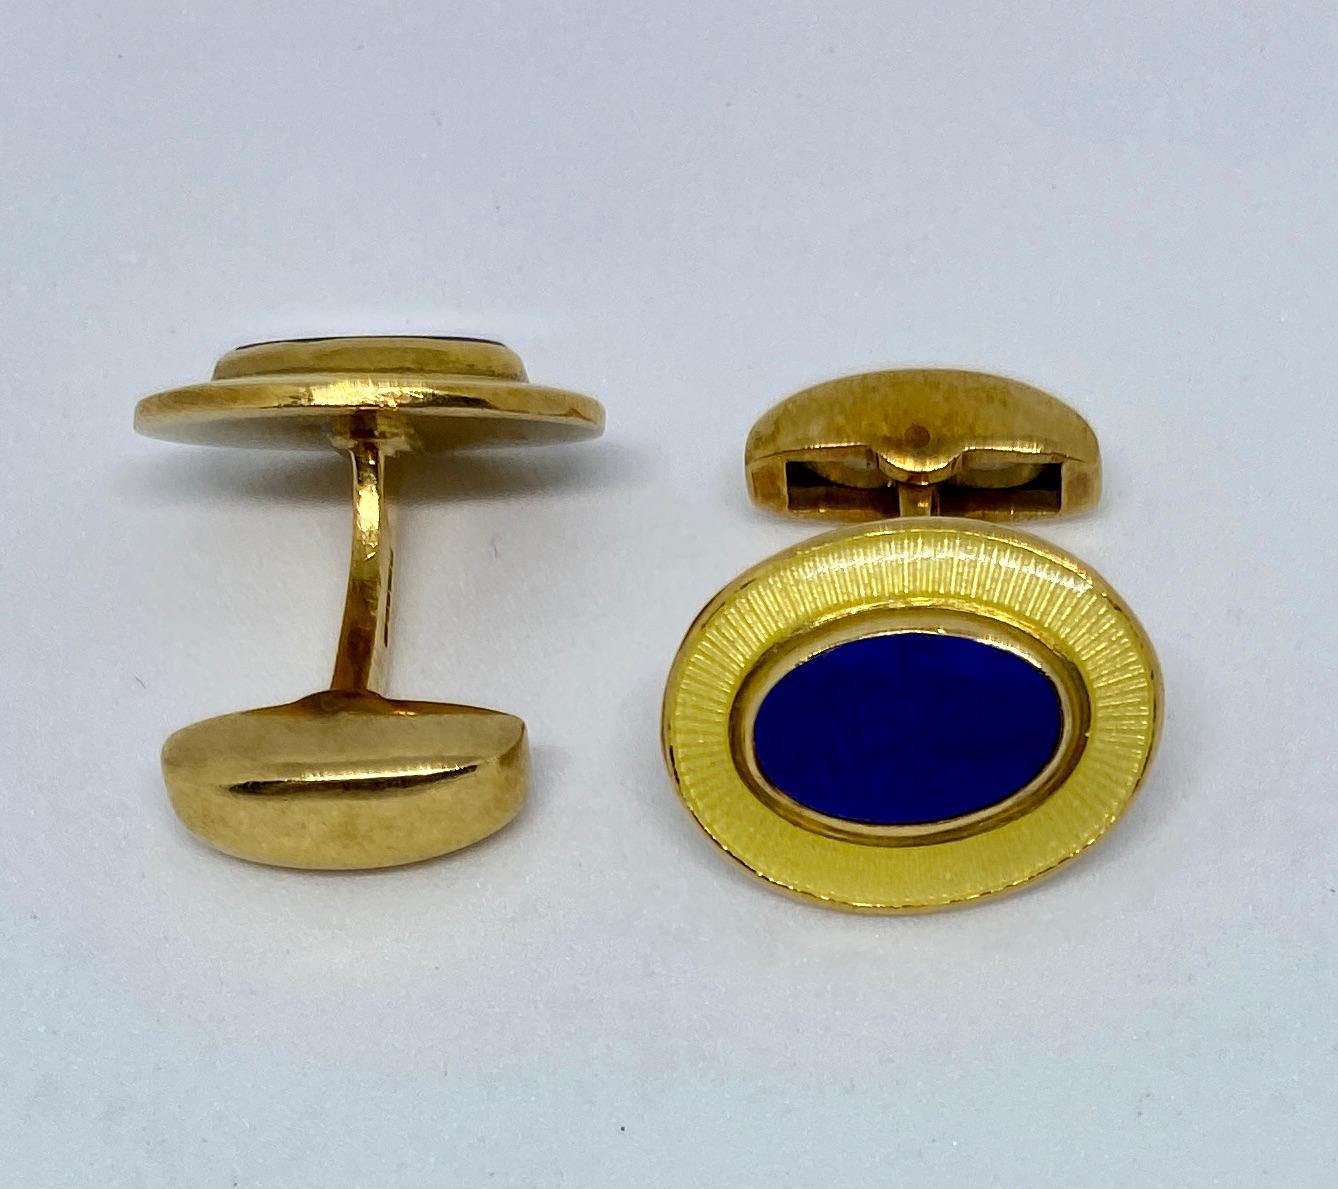 Fantastic, oval-shaped cufflinks featuring hand-cut lapis inlays and clear enamel over an engraved border. With hinged backs, these cufflinks are extremely versatile and easy to insert and remove.

The cufflinks feature numerous marks: D&F, ENGLAND,